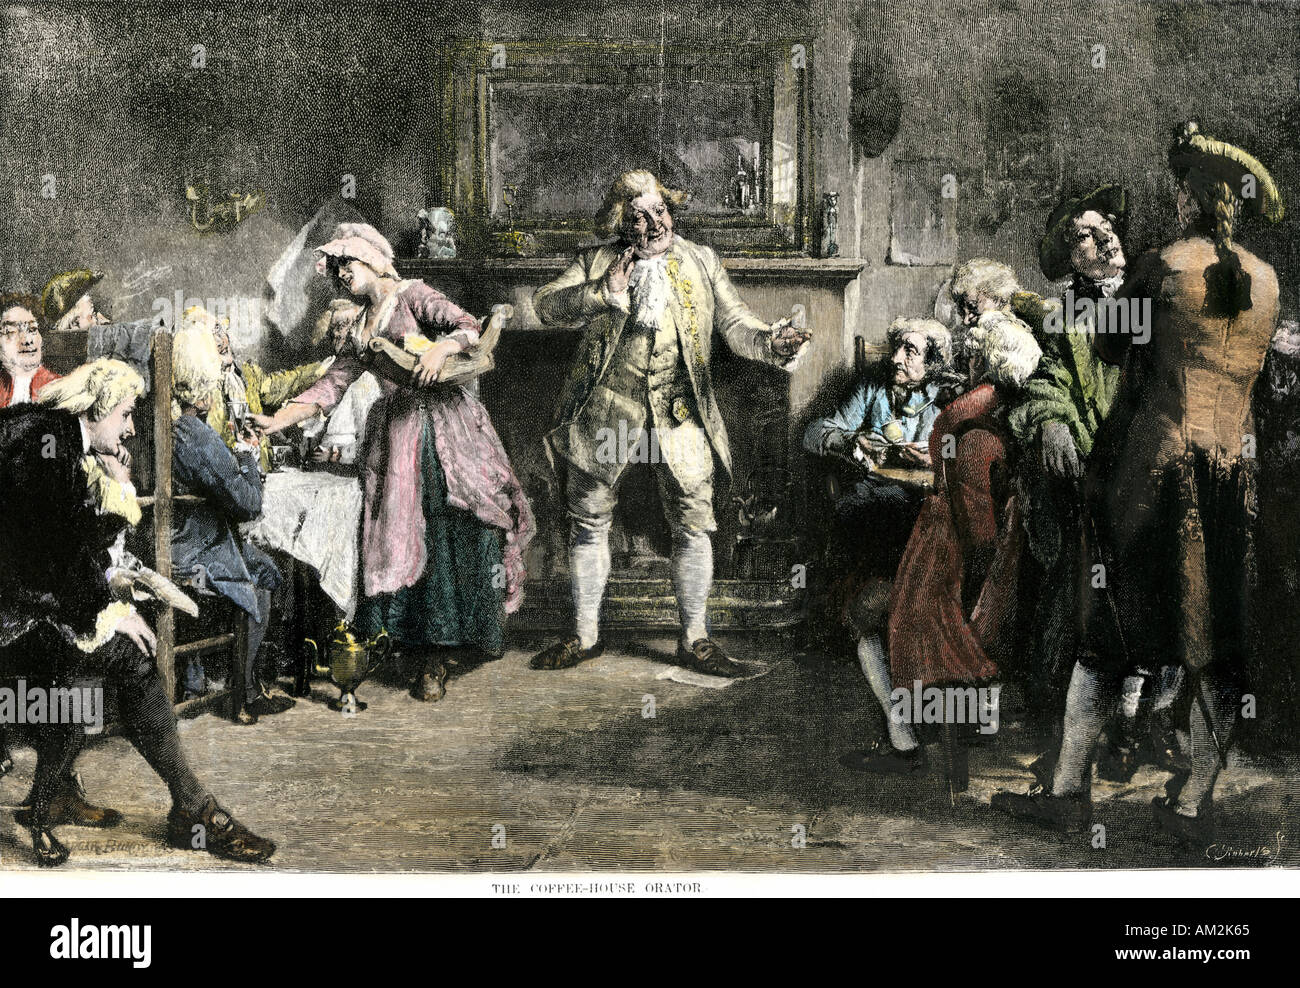 Coffee house orator in London 1700s. Hand-colored halftone of an illustration Stock Photo